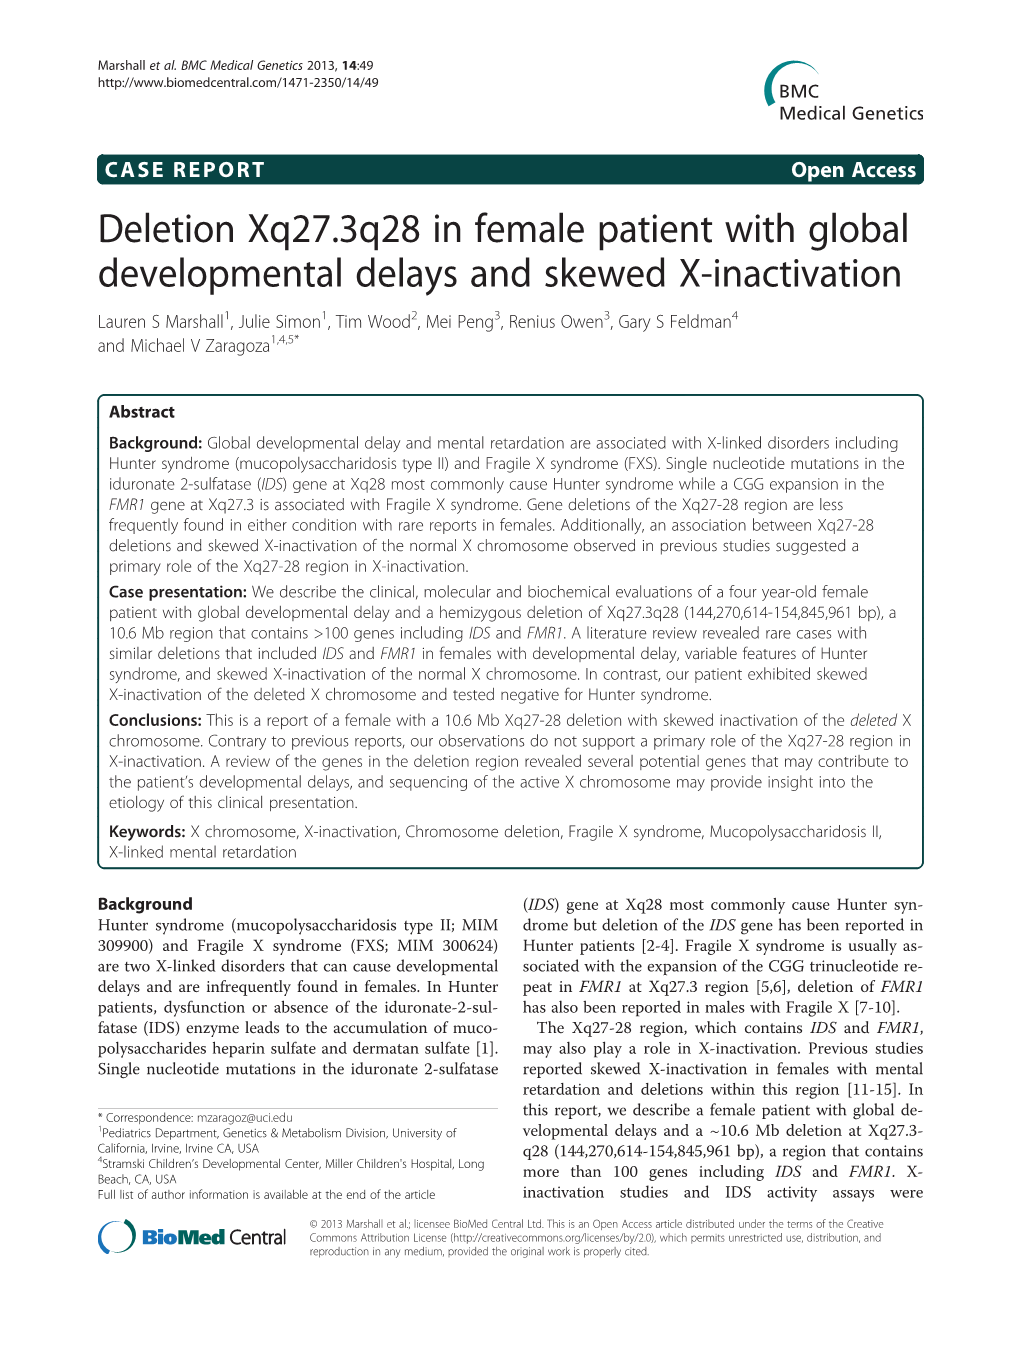 Deletion Xq27.3Q28 in Female Patient with Global Developmental Delays